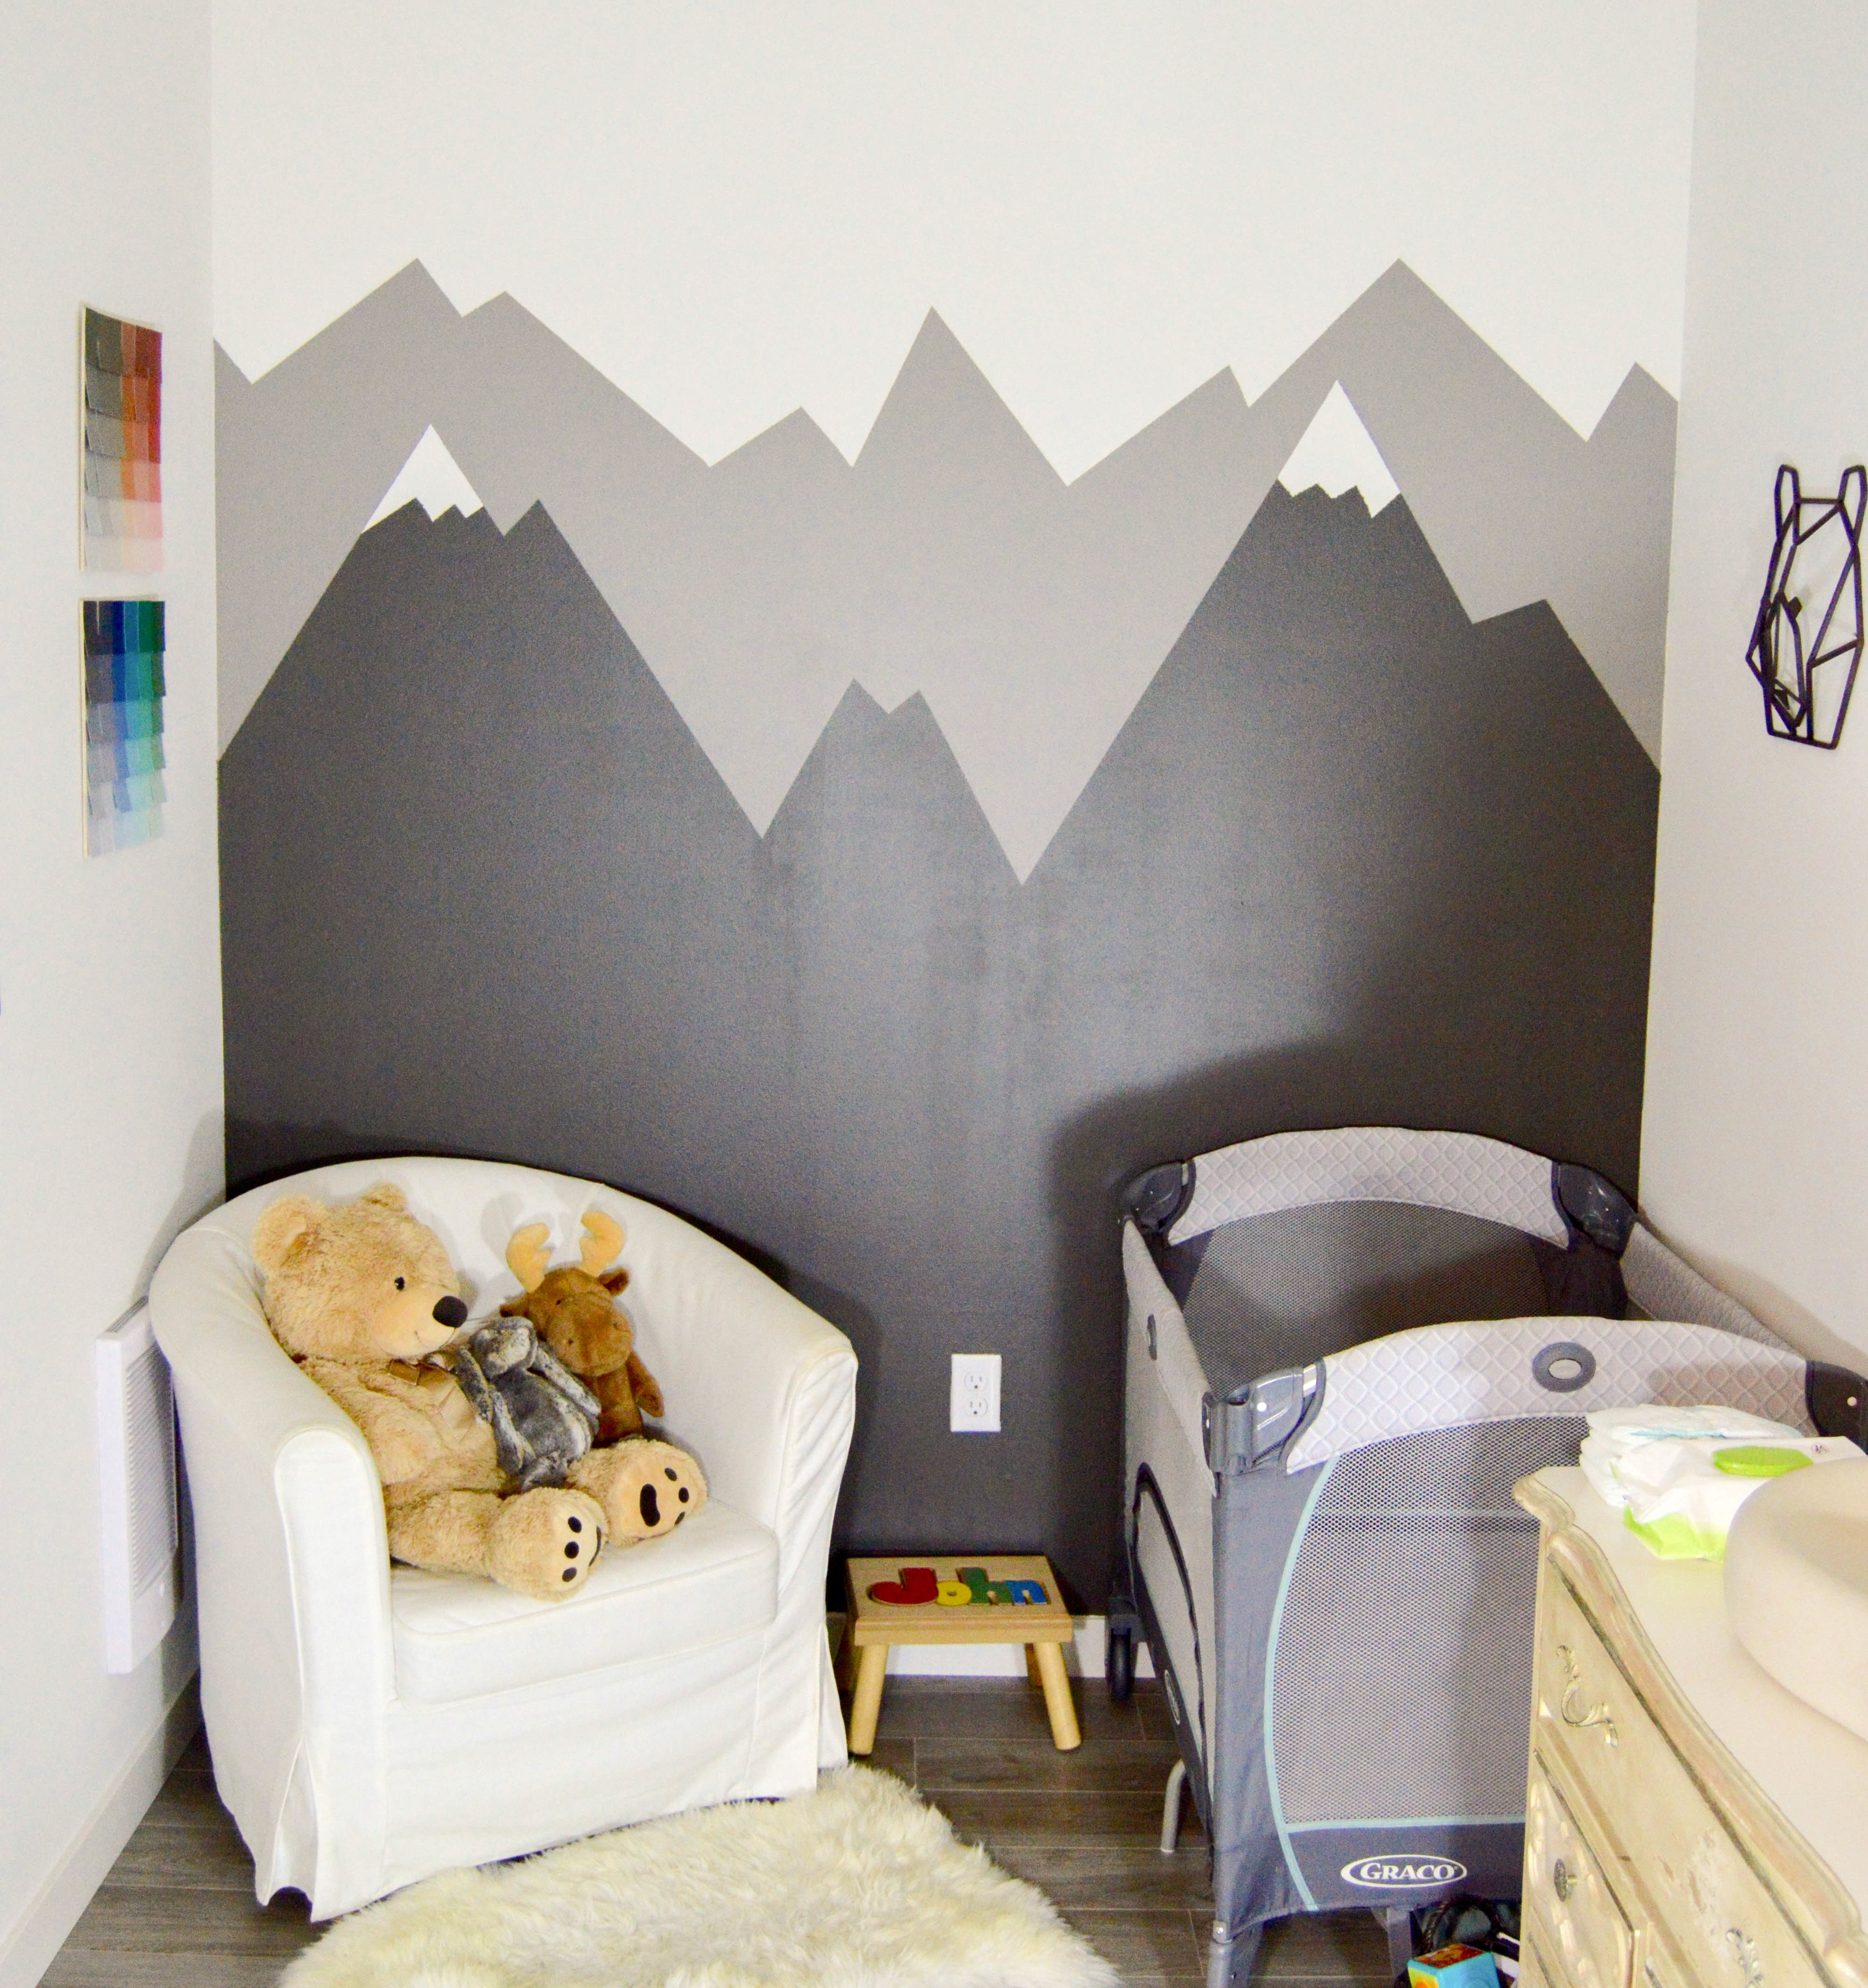 Mountain Mural Tutorial - Easy and quick step by step DIY mountain mural tutorial for how to paint a mountain mural on a budget. Cute nursery wall idea for a mountain themed room.